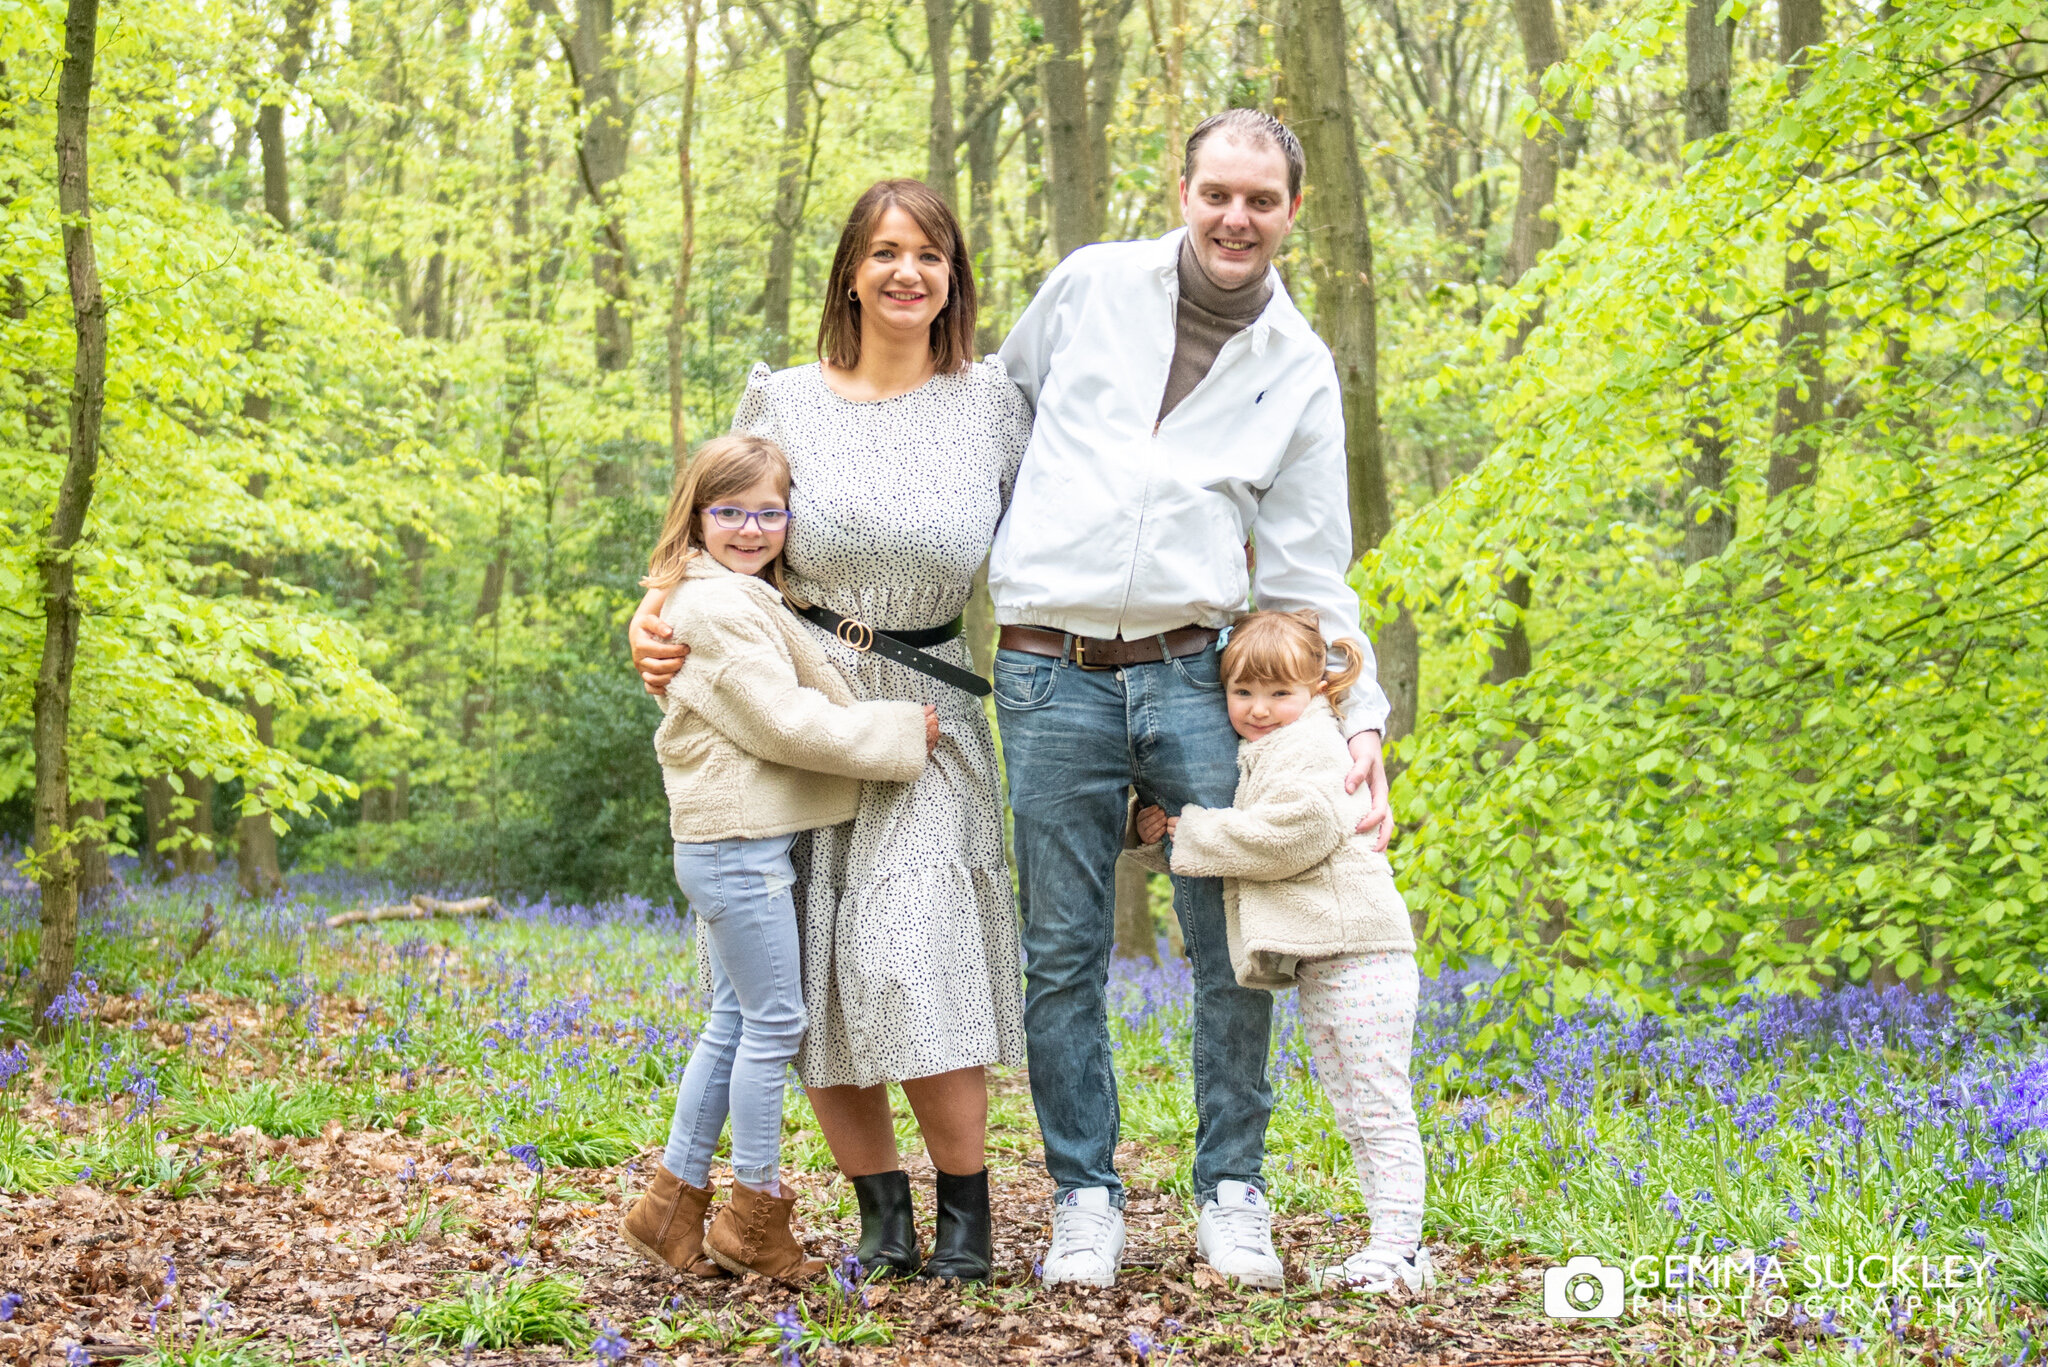 woodland engagement photo with their kids in shipley wood